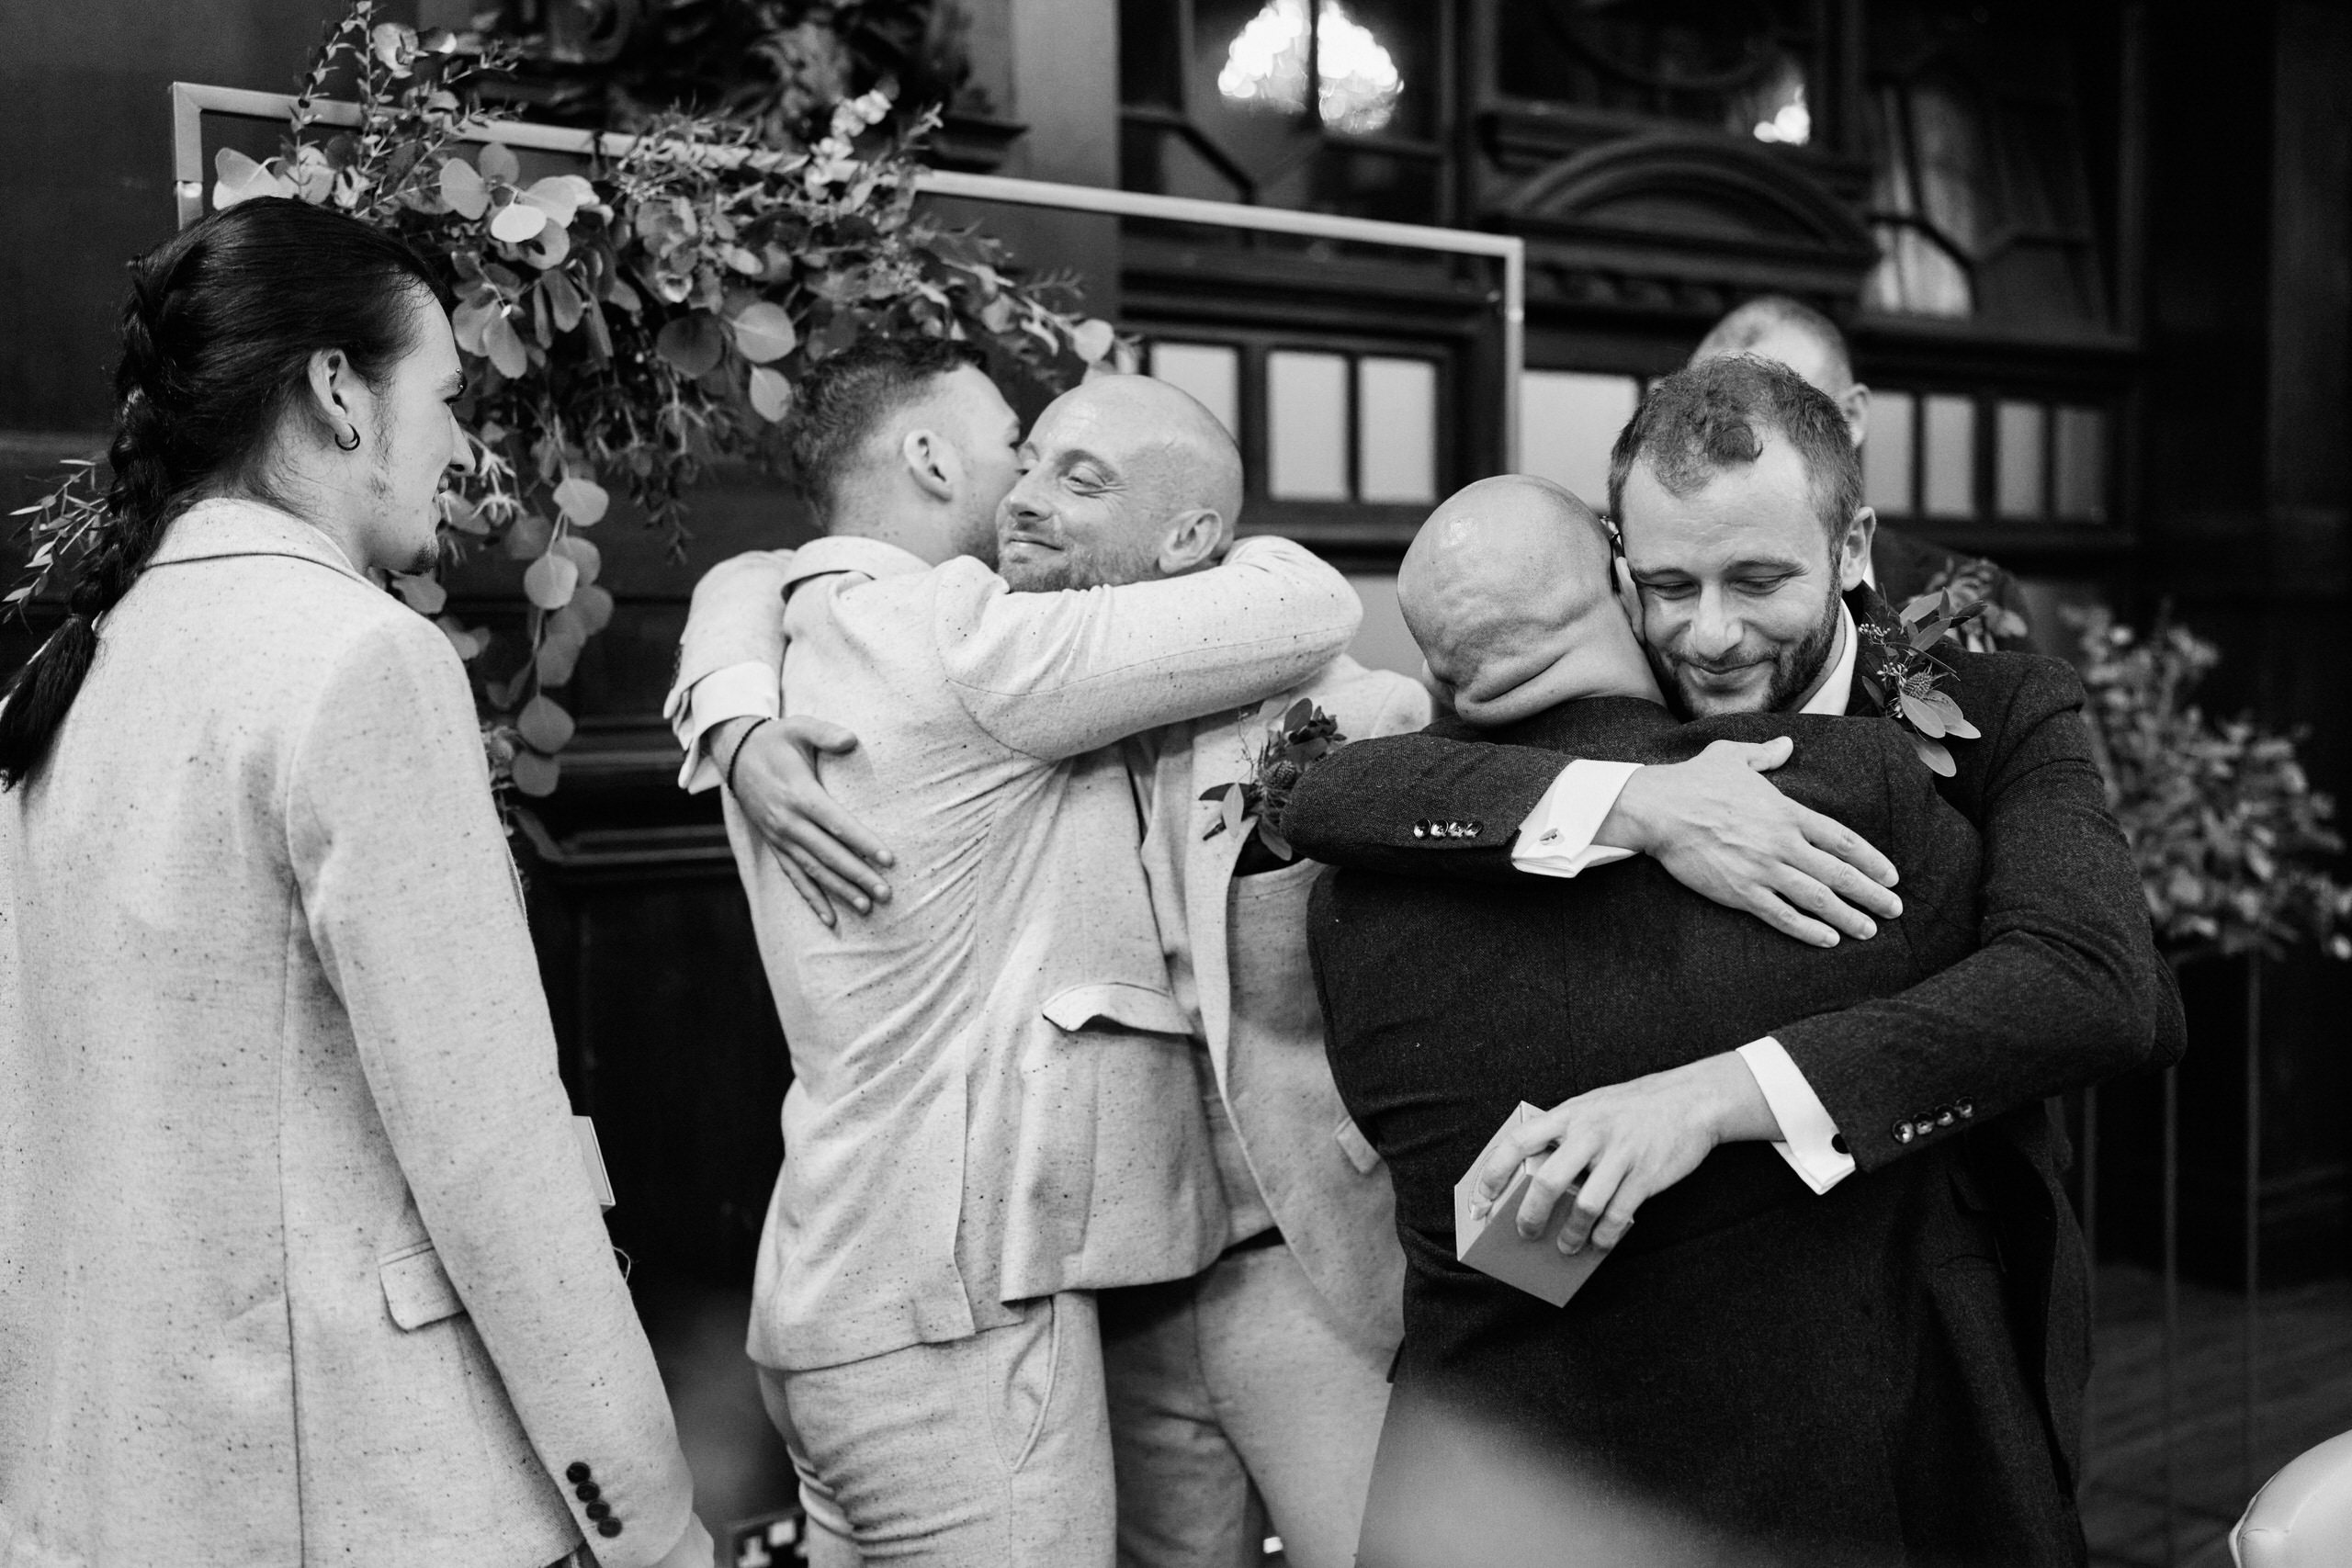 A bunch of guys are giving each other hugs at a wedding.